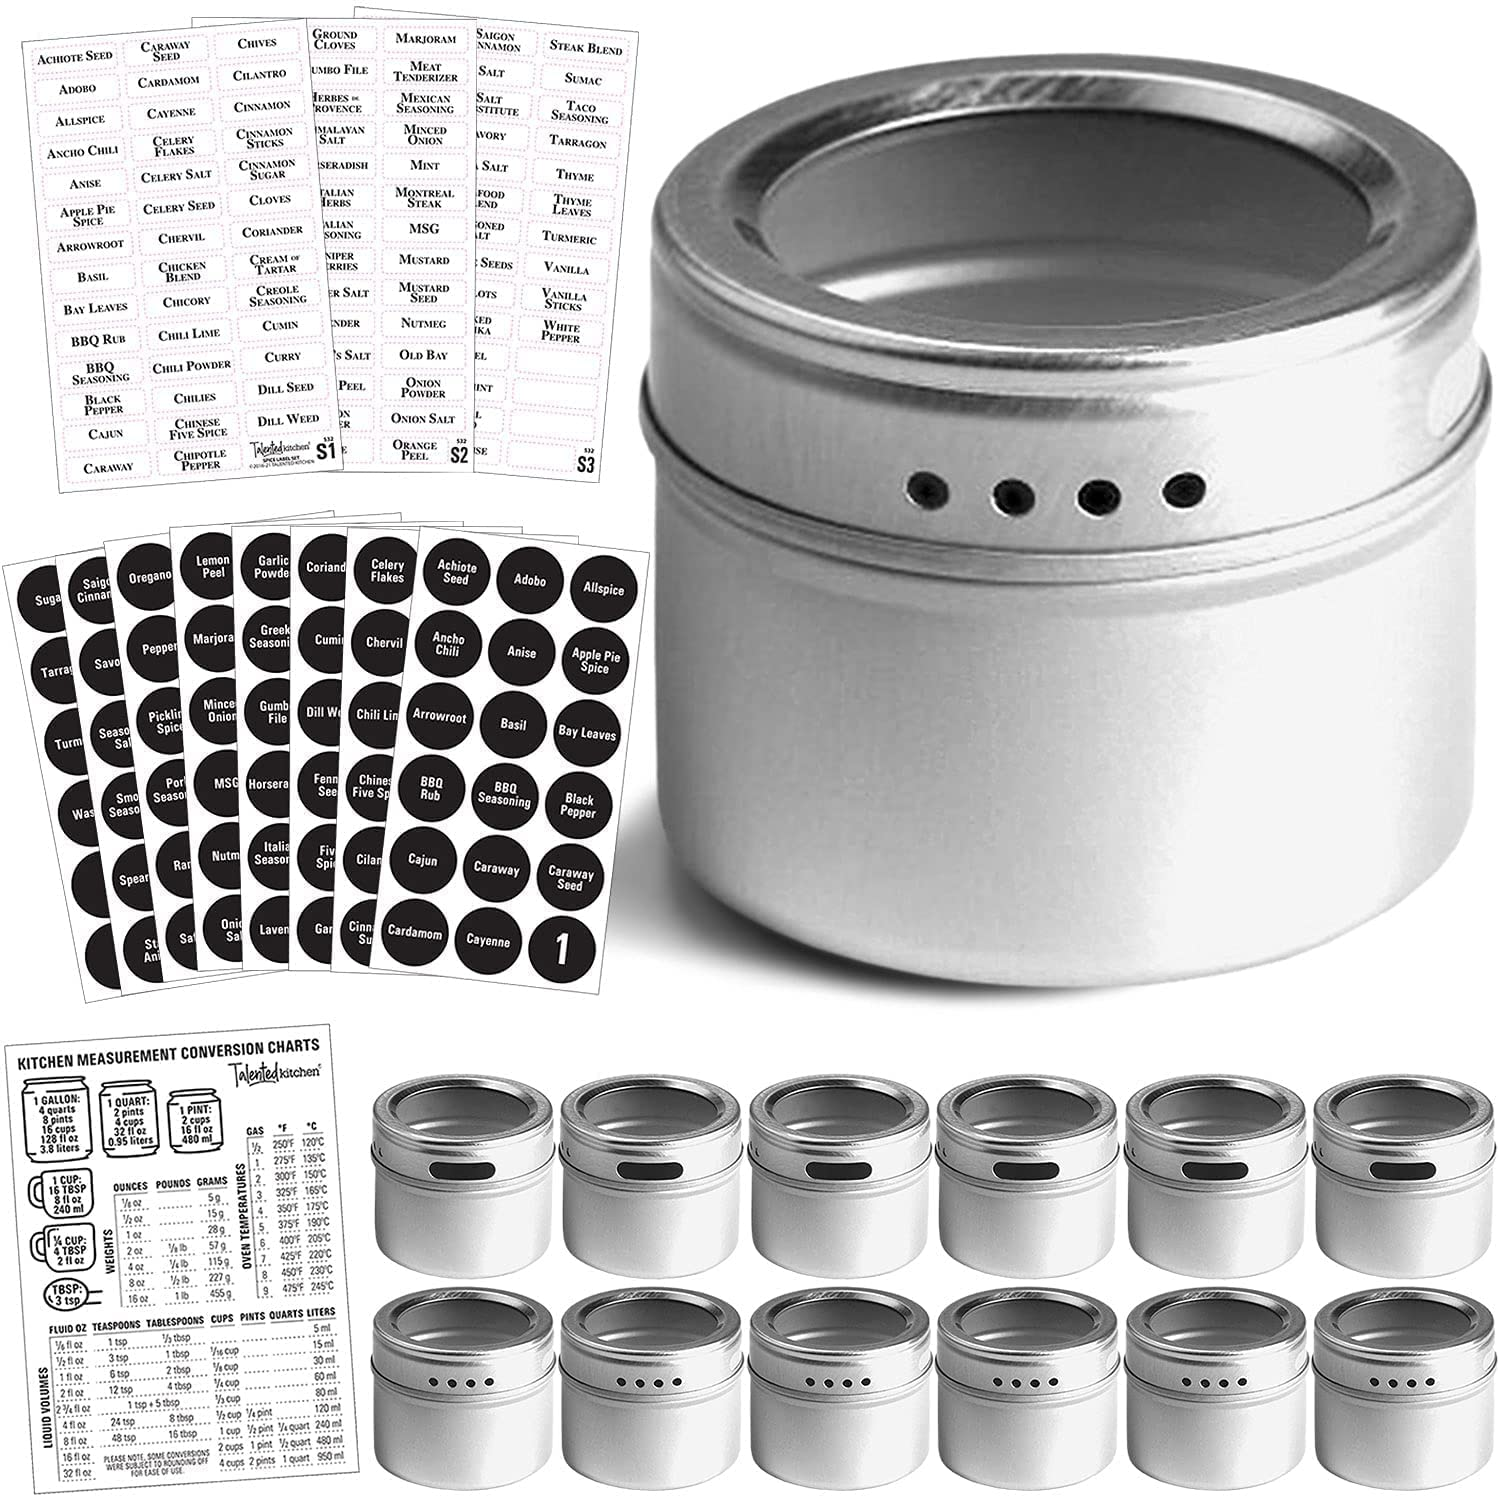 Set of 12 Magnetic Spice Tins with 12 Window-Top Sift and Pour Lids, 269 Preprinted Seasoning Label Stickers in 2 Styles for 3 Oz Herb Jars